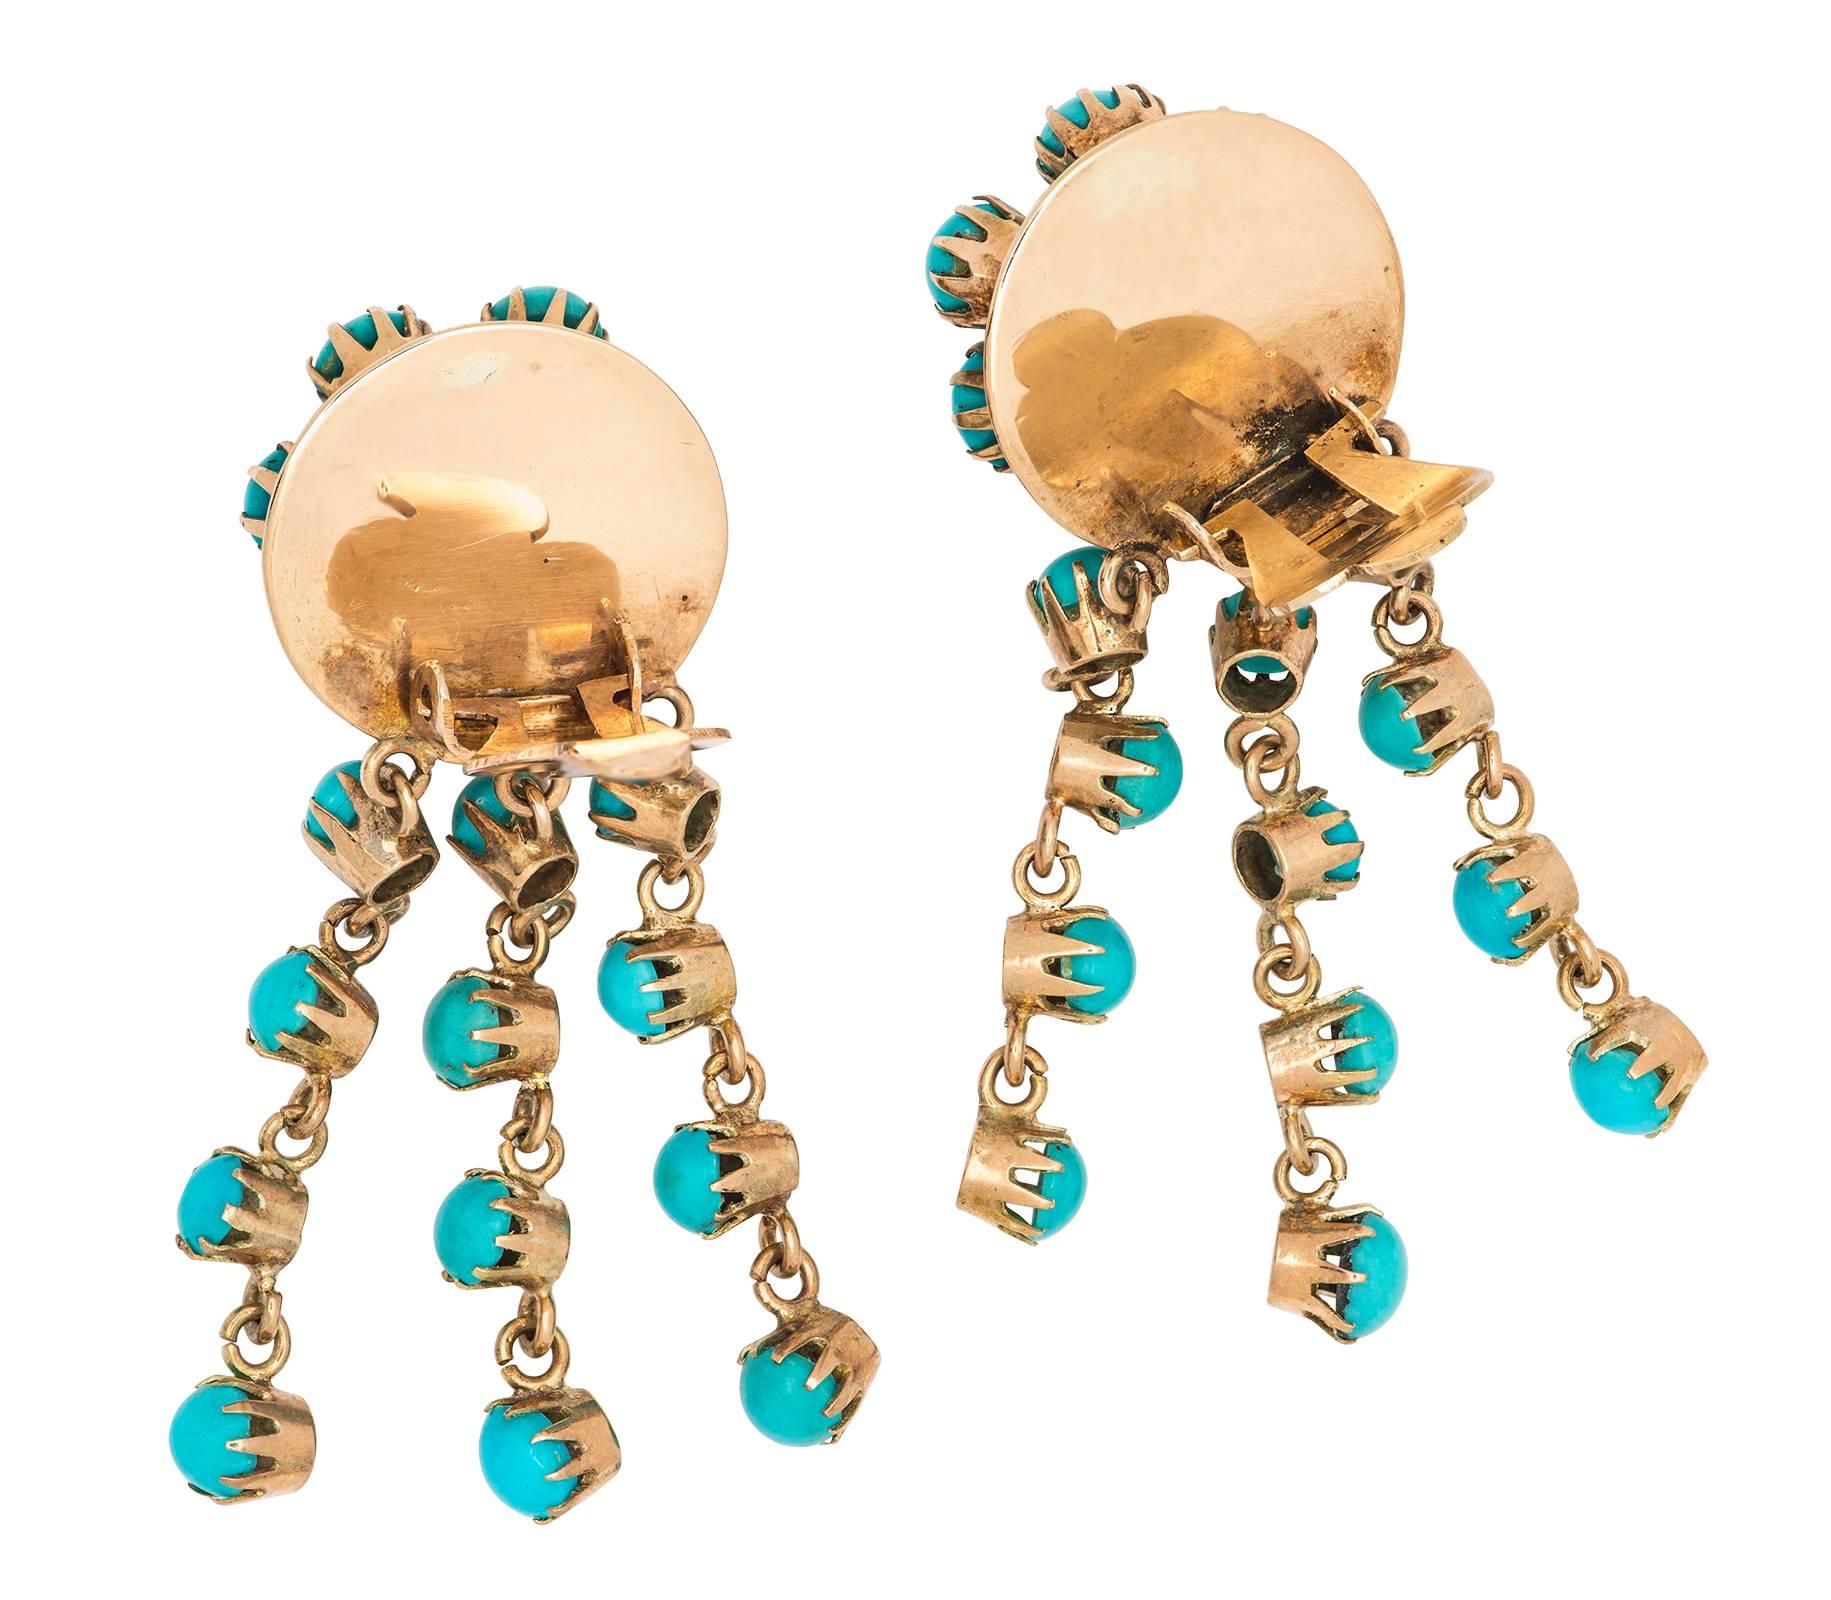 Spectacular pair of Victorian era Persian Turquoise Tassel earrings.
Tested 14k yellow gold, Secure tight ear clip backs with peg for pierced ears. .75  X 2